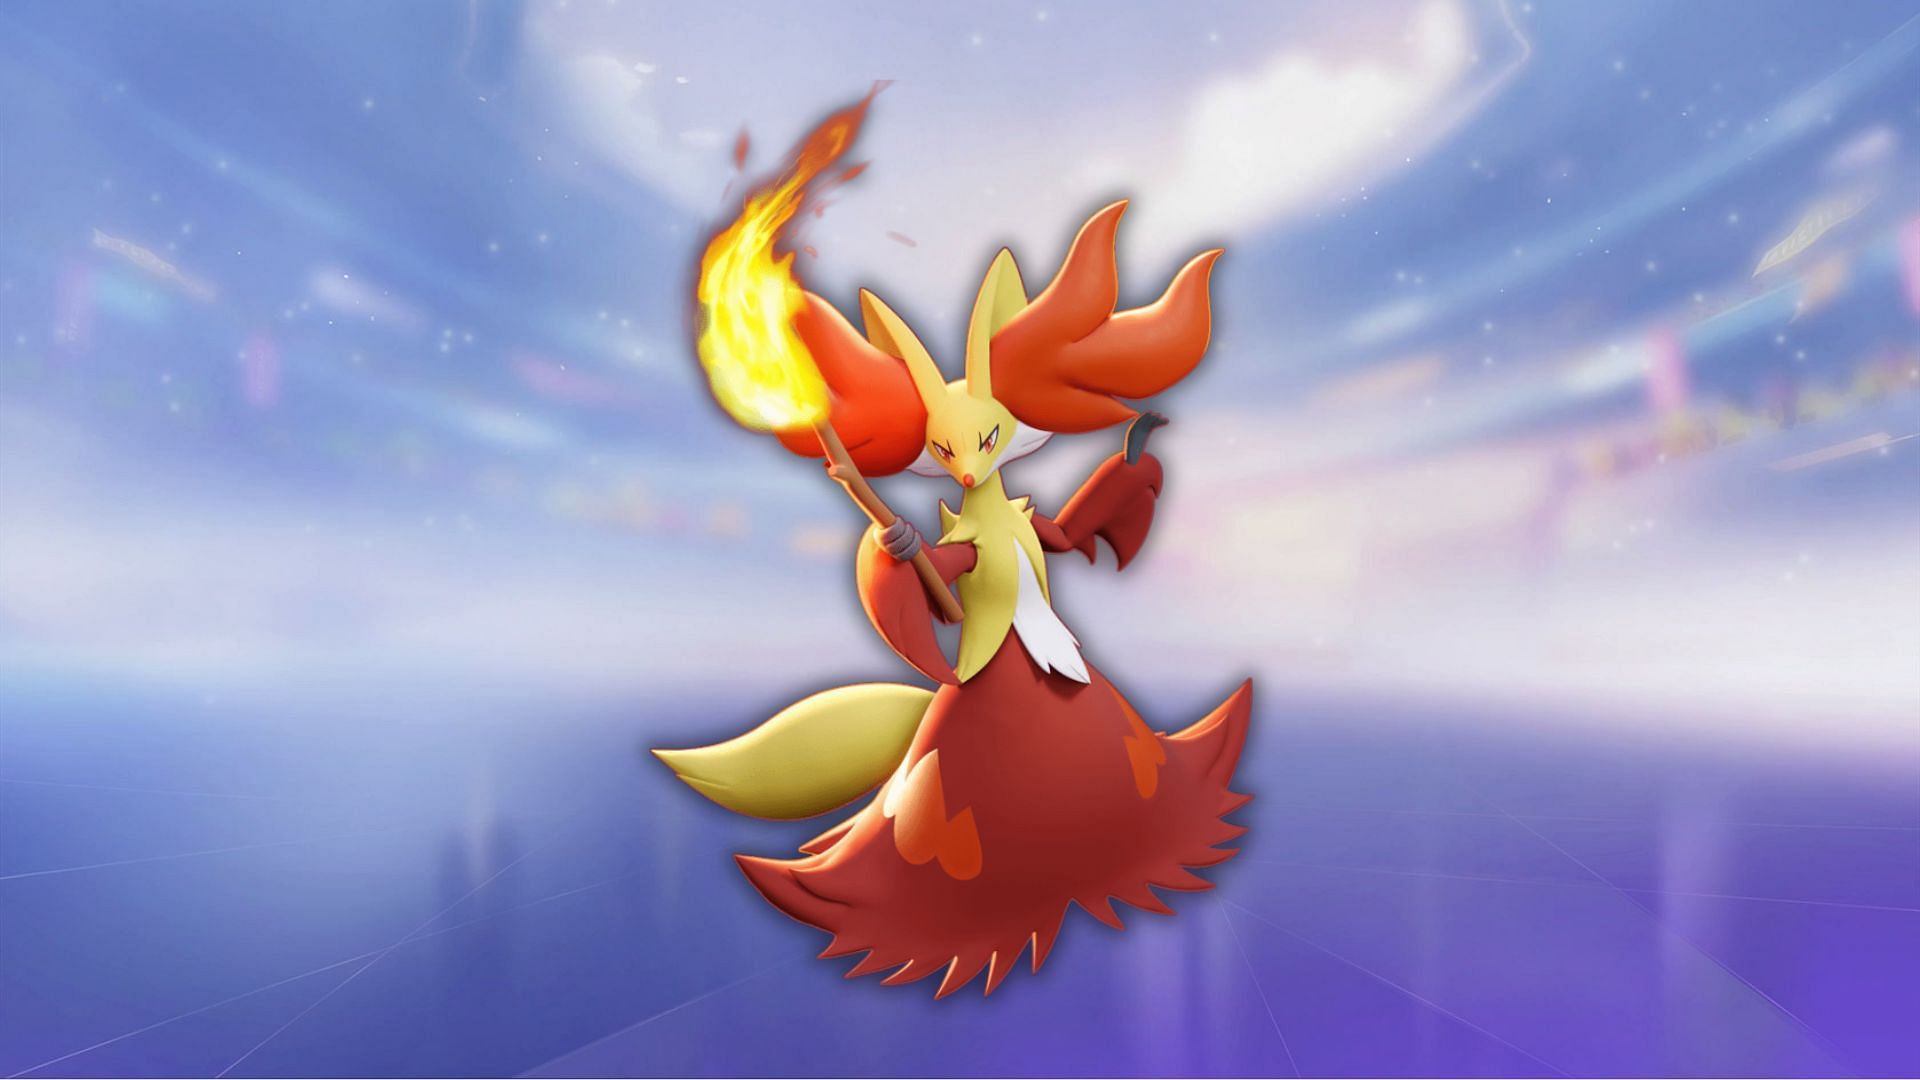 Delphox might not deliver the same damage out but will still be a functional addition to the team (Image via The Pokemon Company)